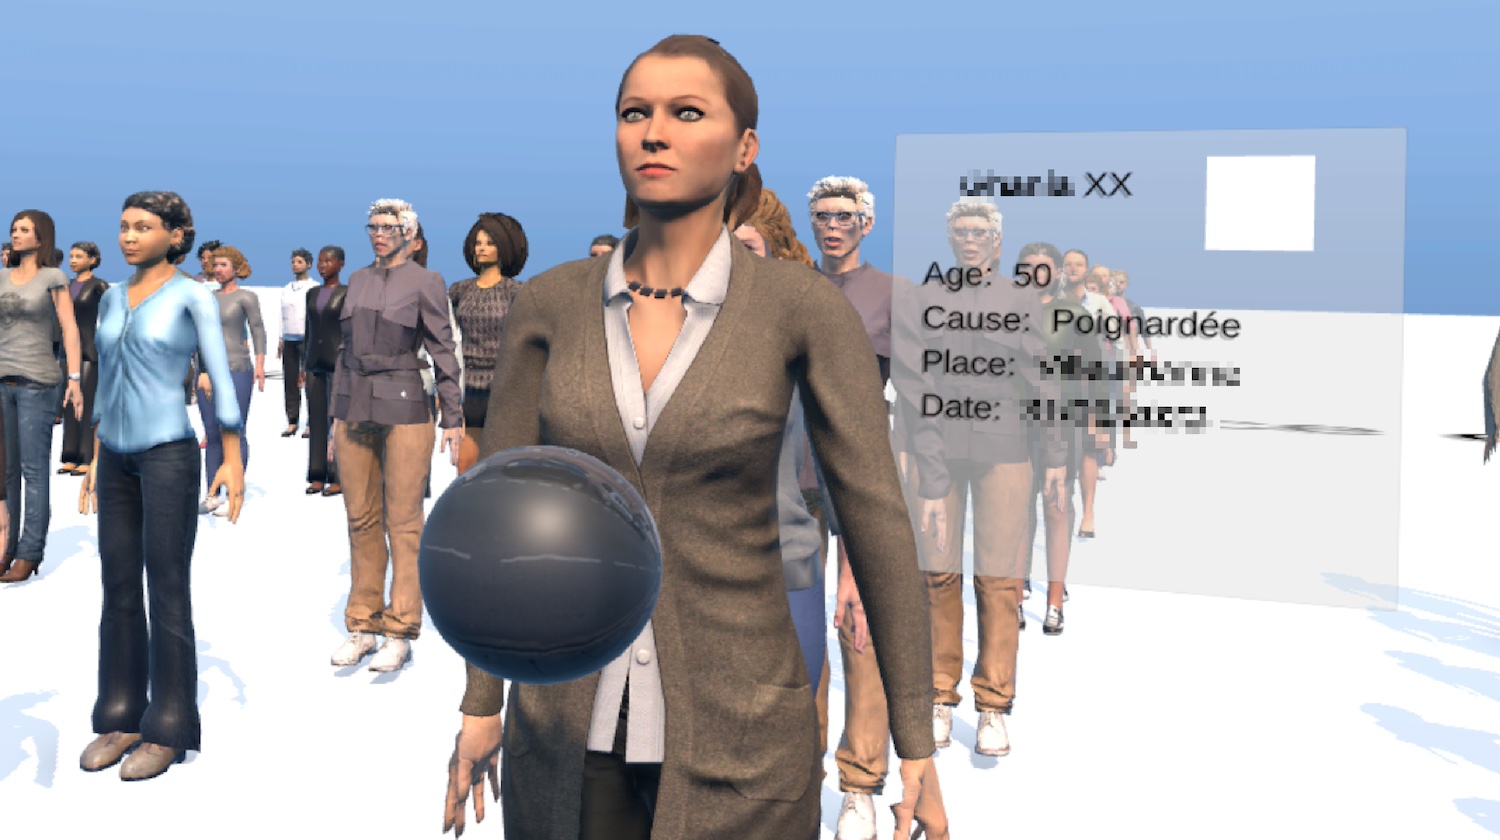 The Feminicide 2022 visualization prototype. The user walks among avatars representing the victims and can read additional information as they approach.